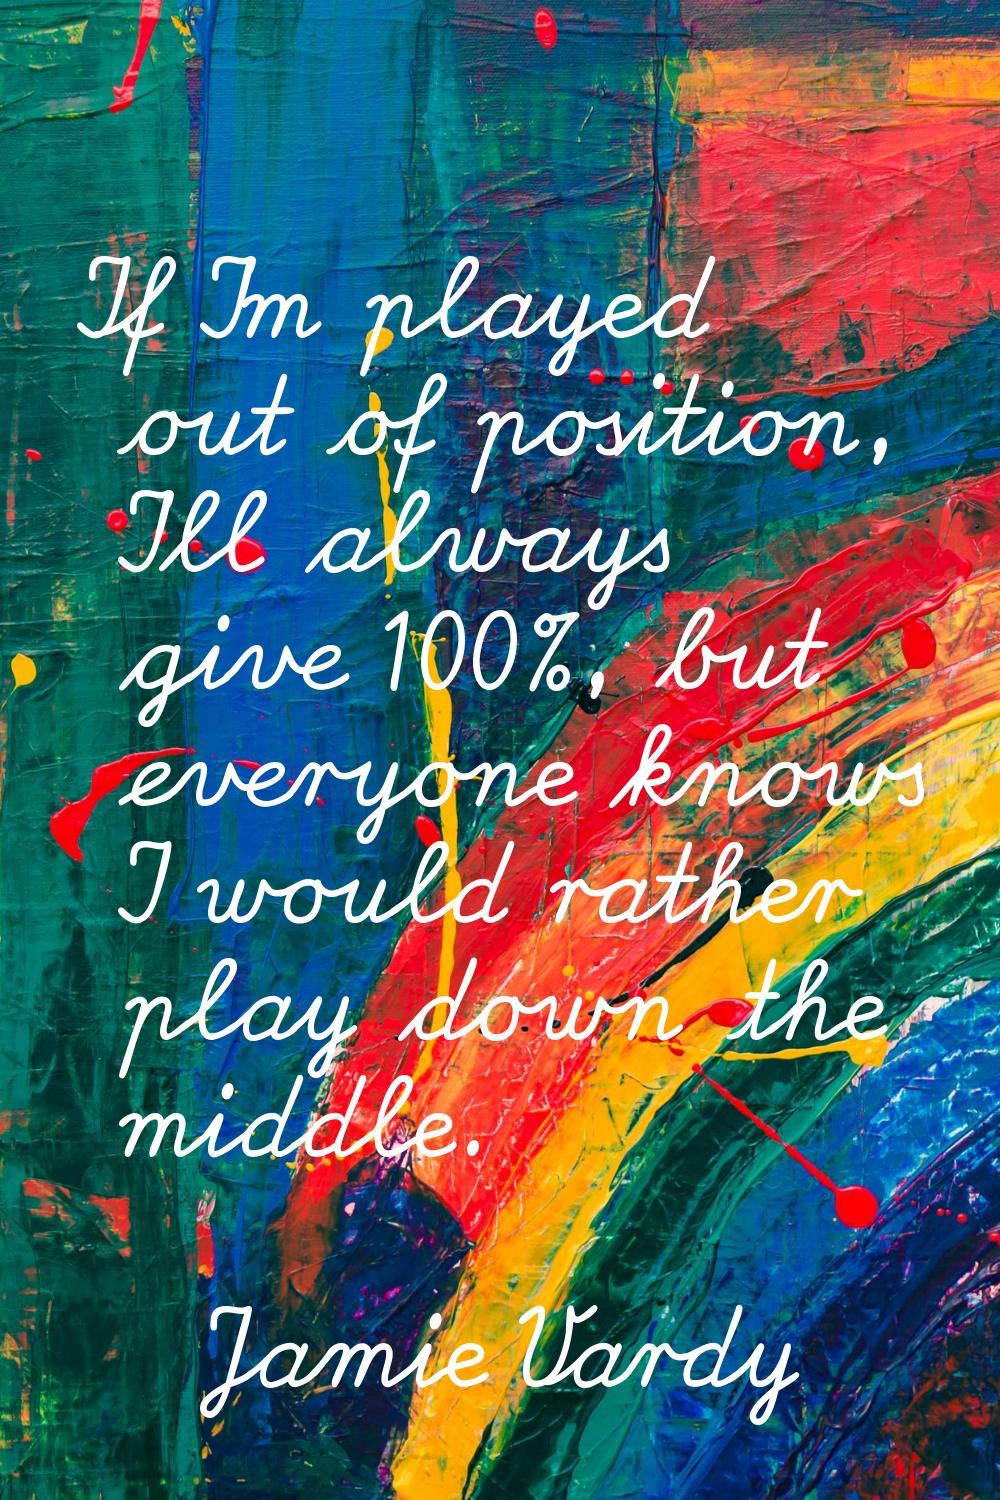 If I'm played out of position, I'll always give 100%, but everyone knows I would rather play down t